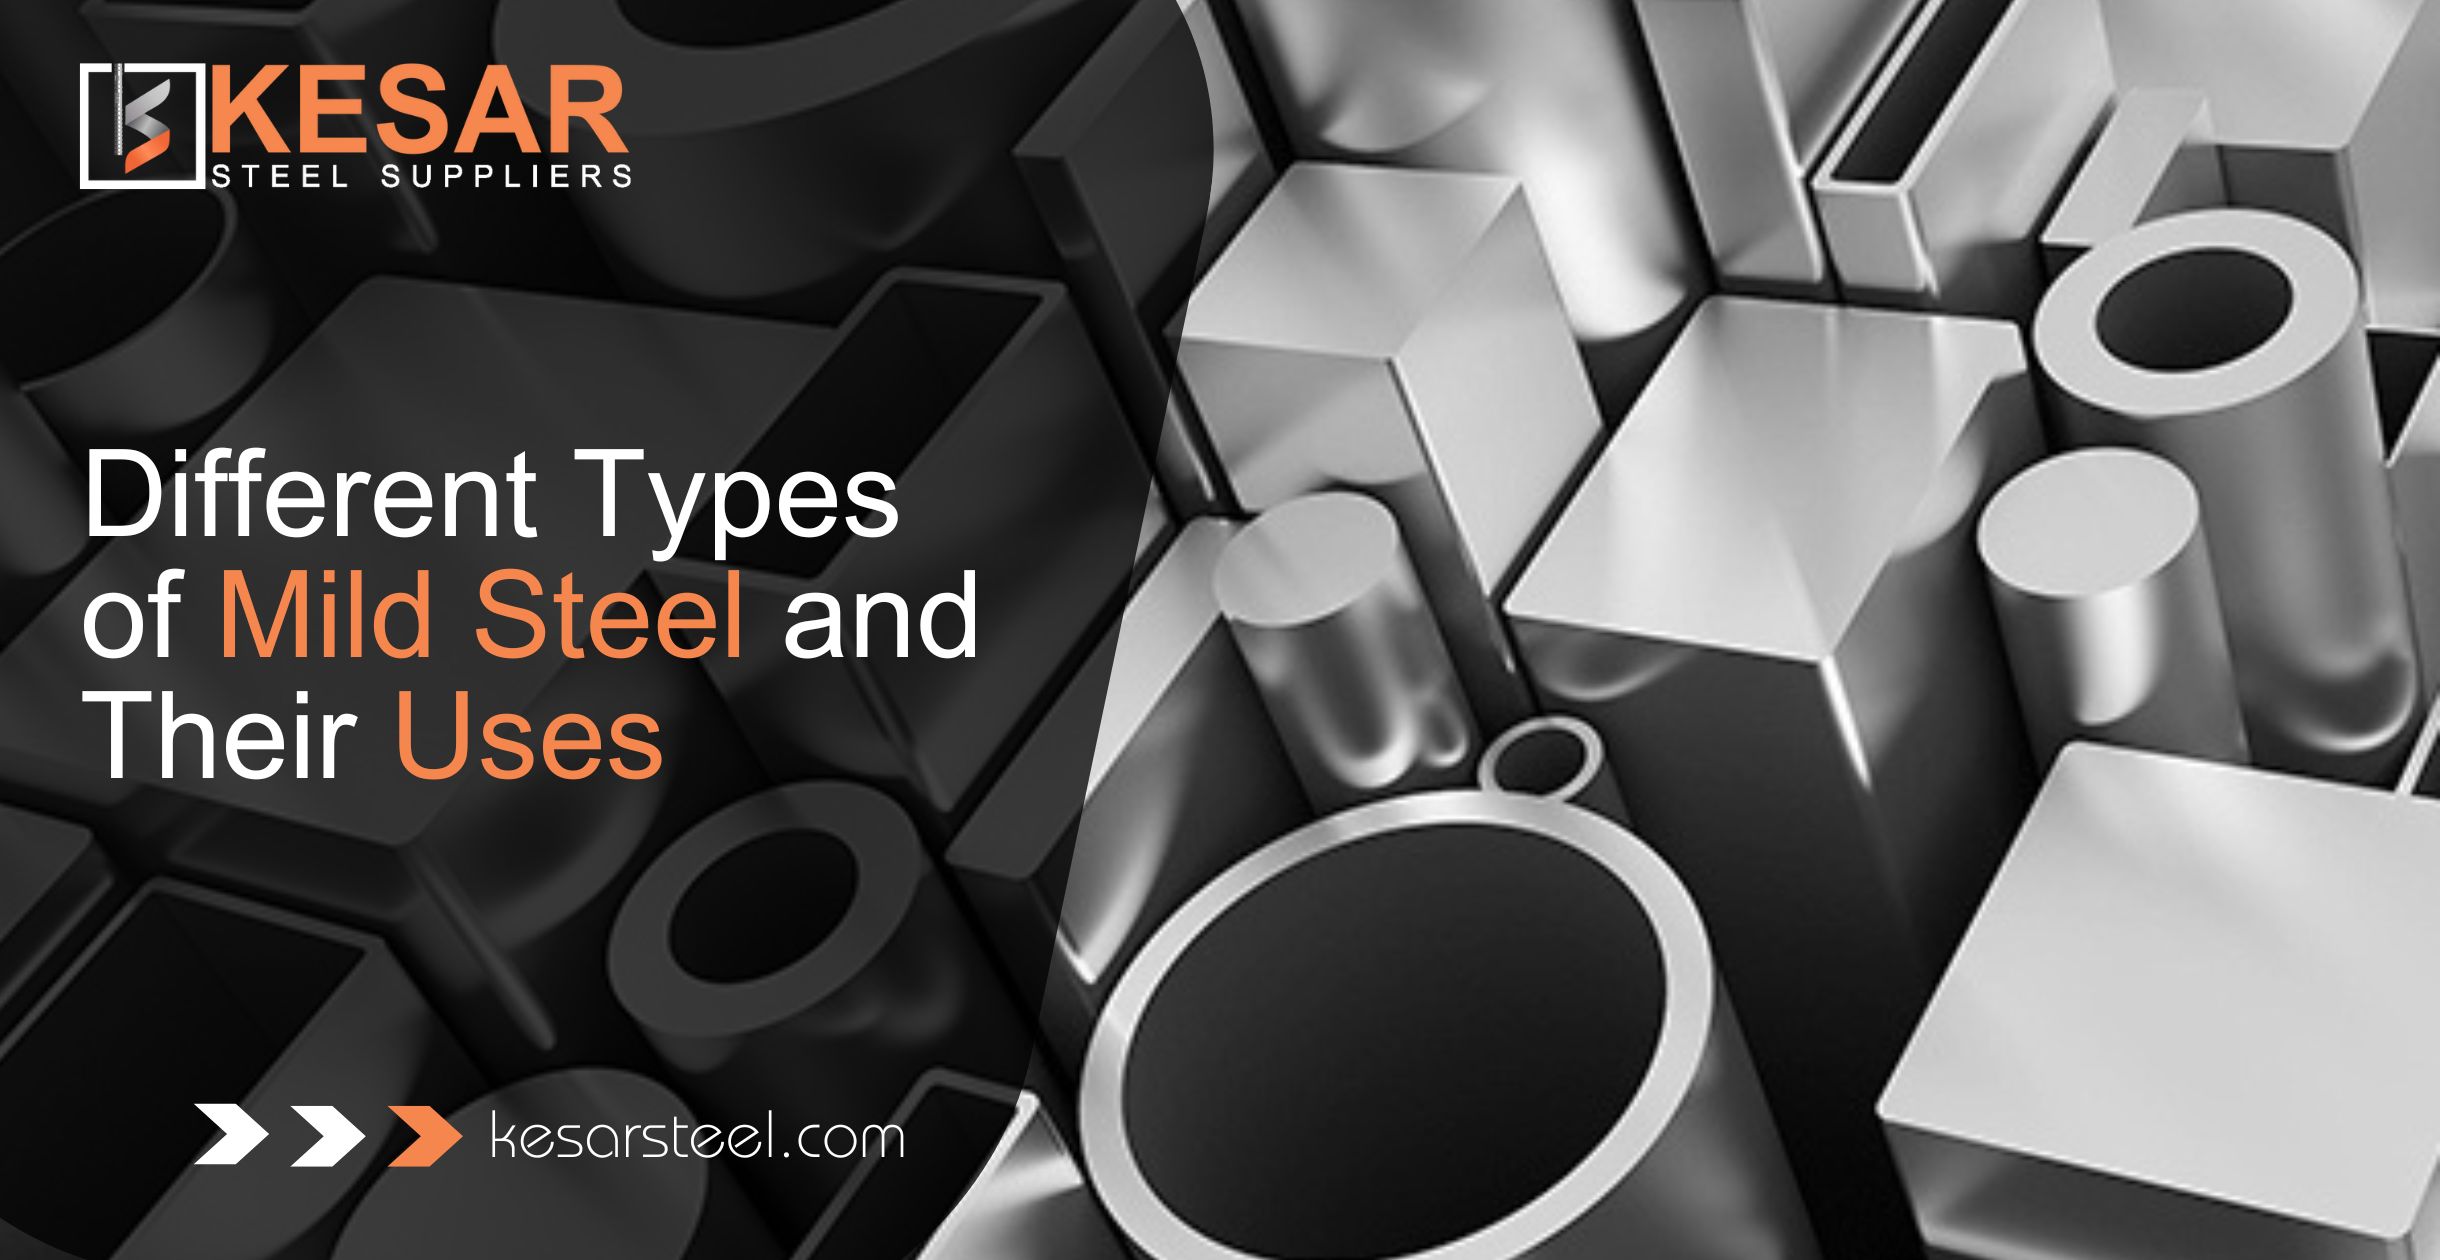 Different Types of Mild Steel and Their Uses